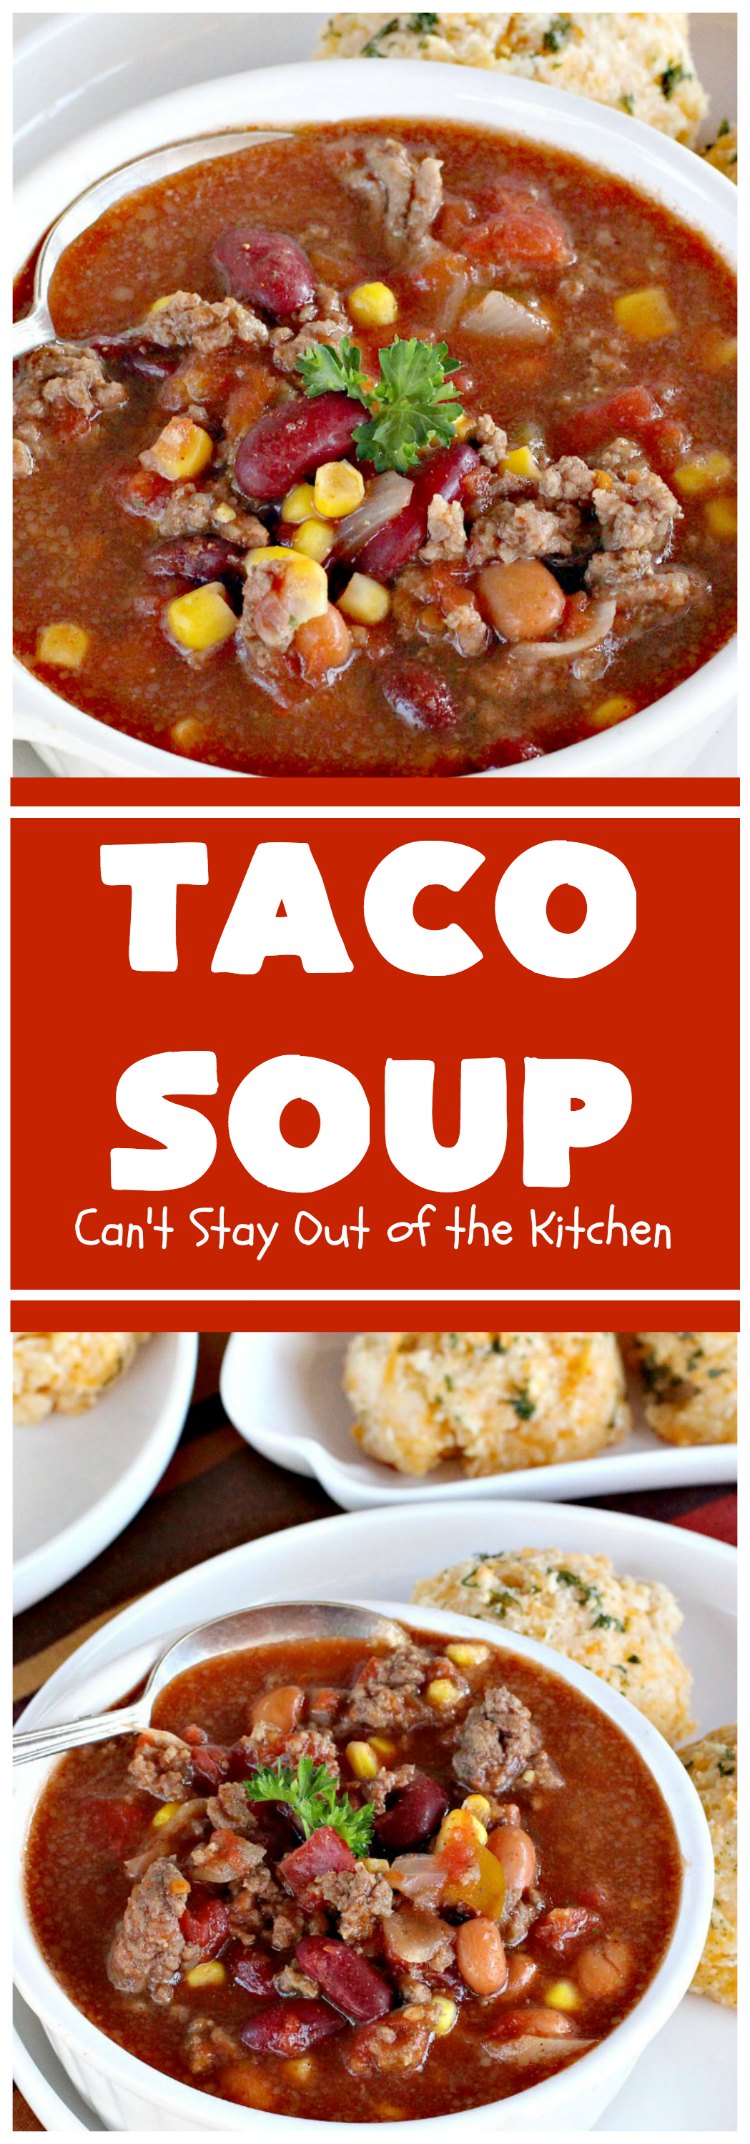 Taco Soup | Can't Stay Out of the Kitchen